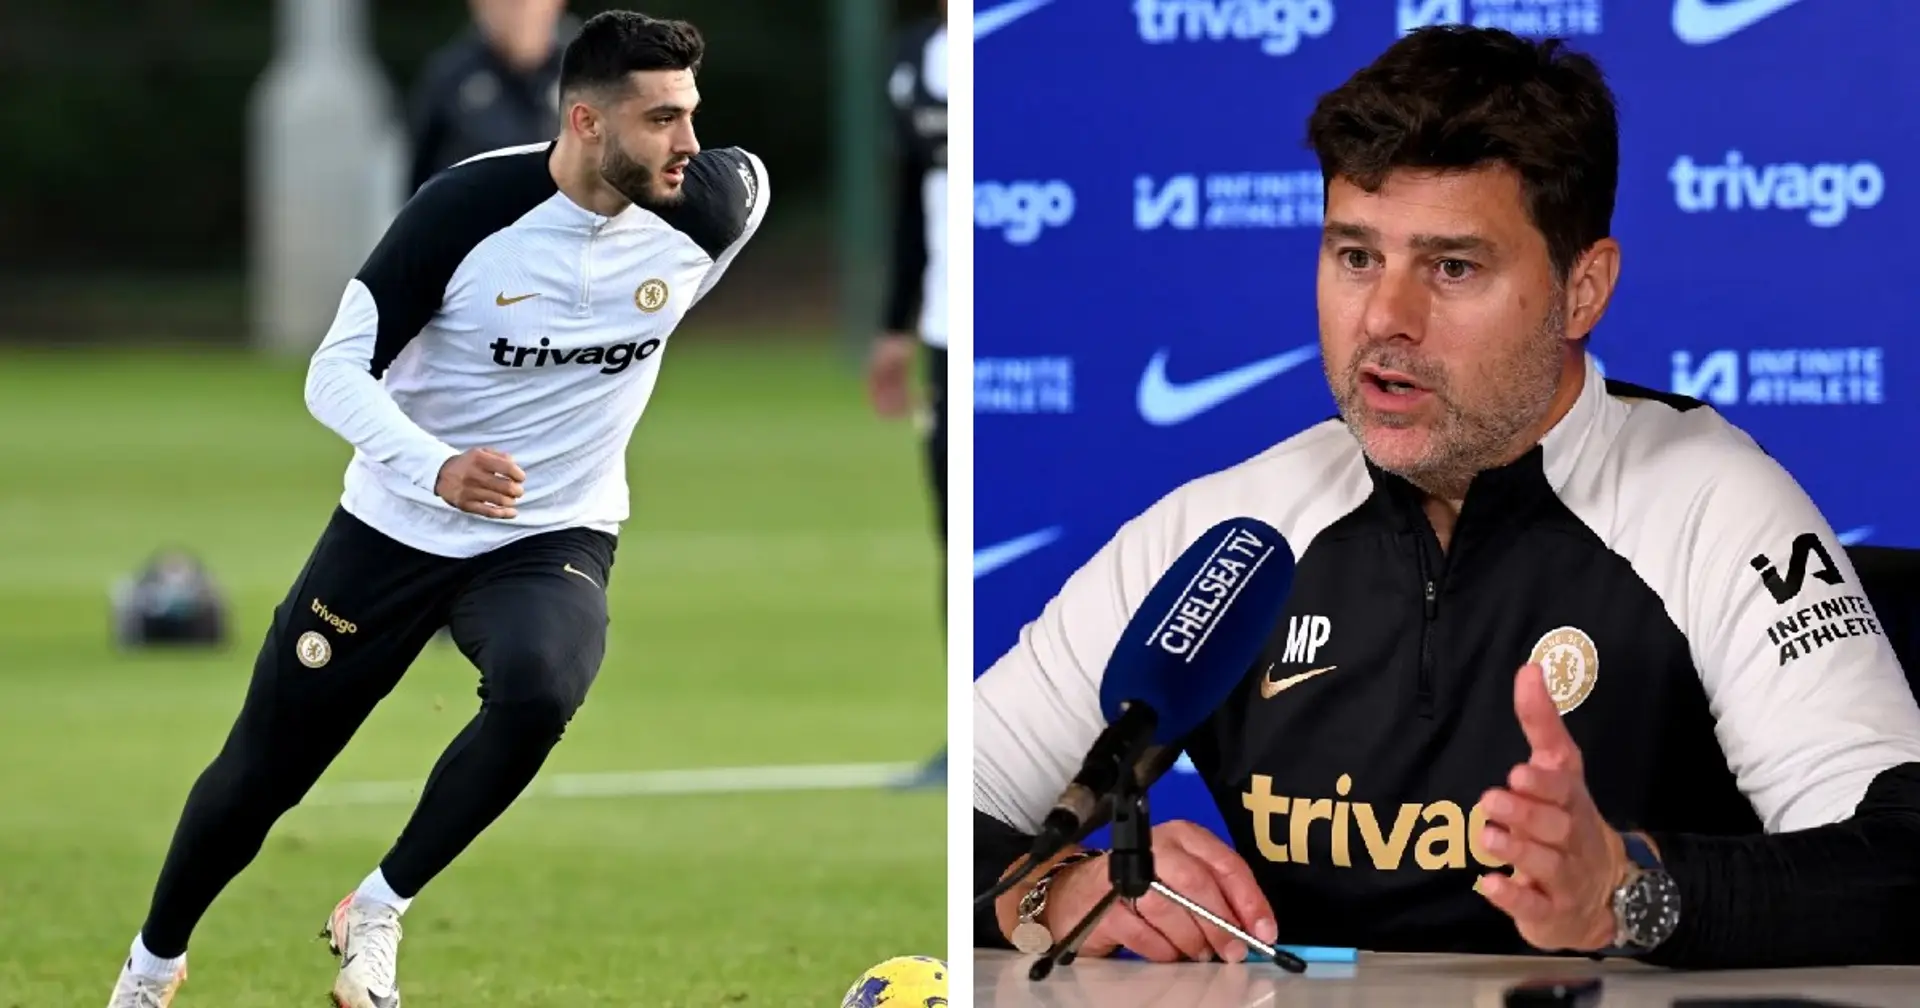 Will Broja be available to face Spurs? Pochettino answers